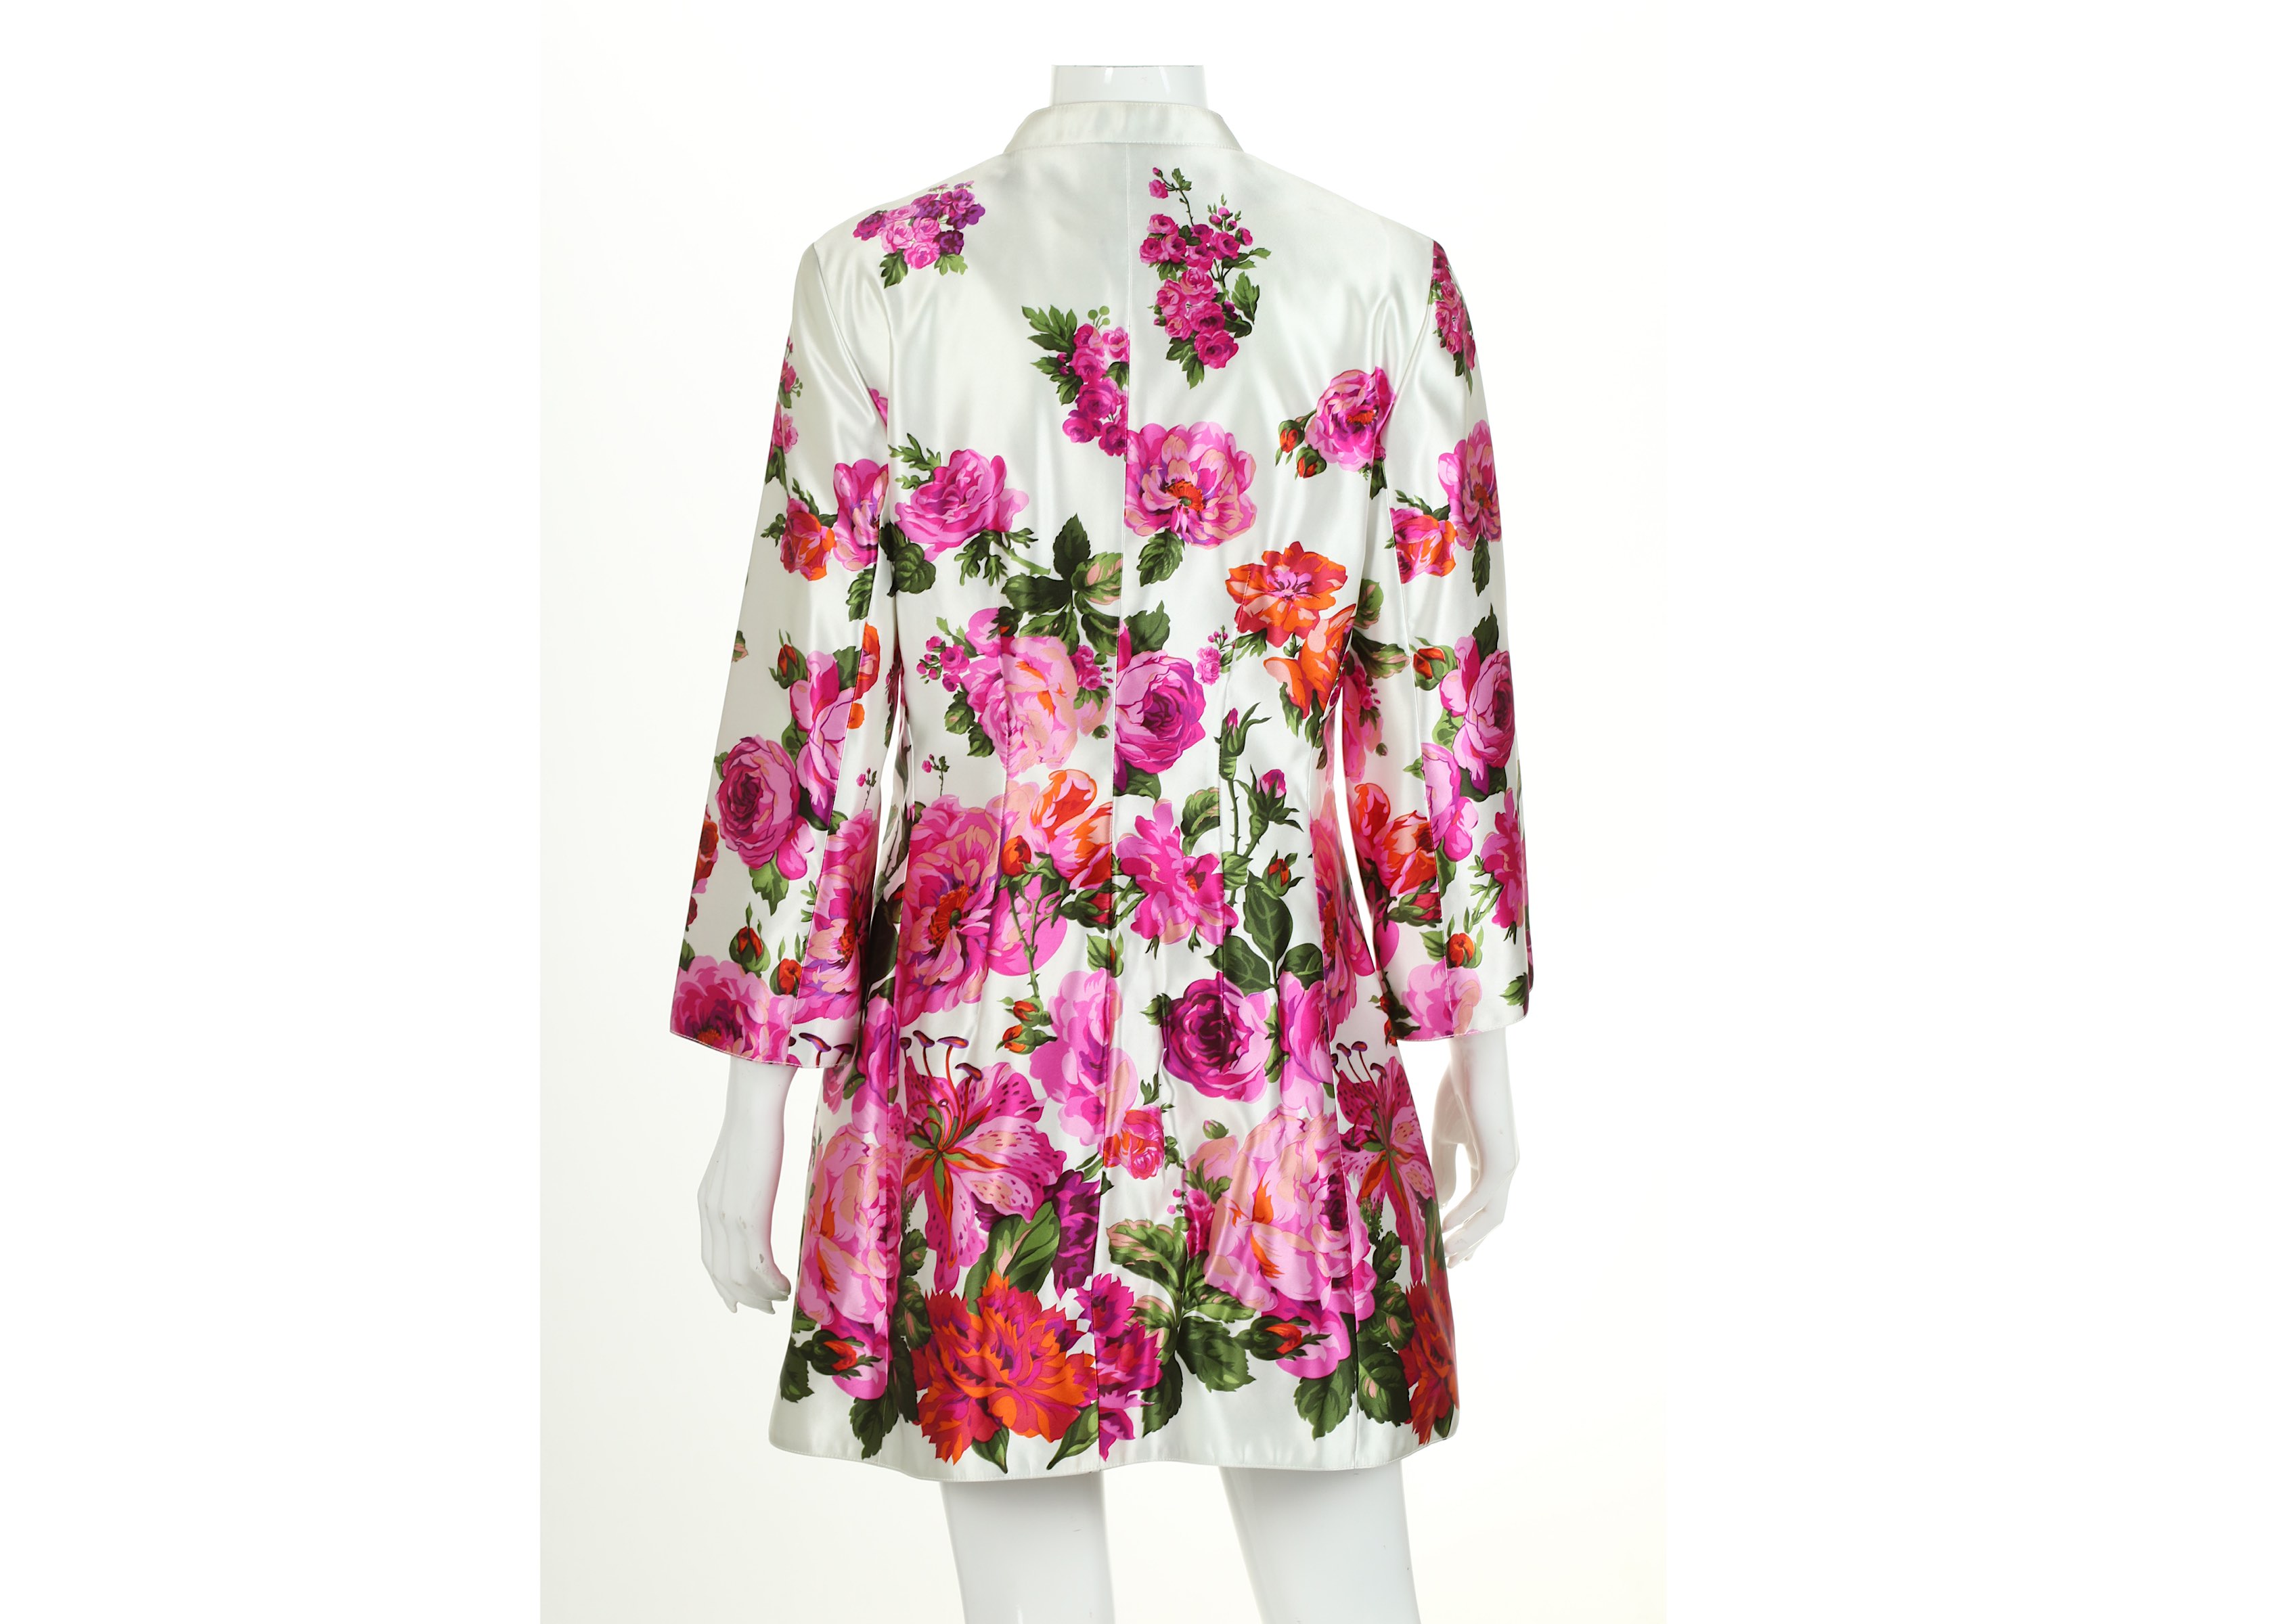 Two Andrew GN Dress Coats, to include a white silk coat printed with pink flower design, labelled S, - Image 5 of 13